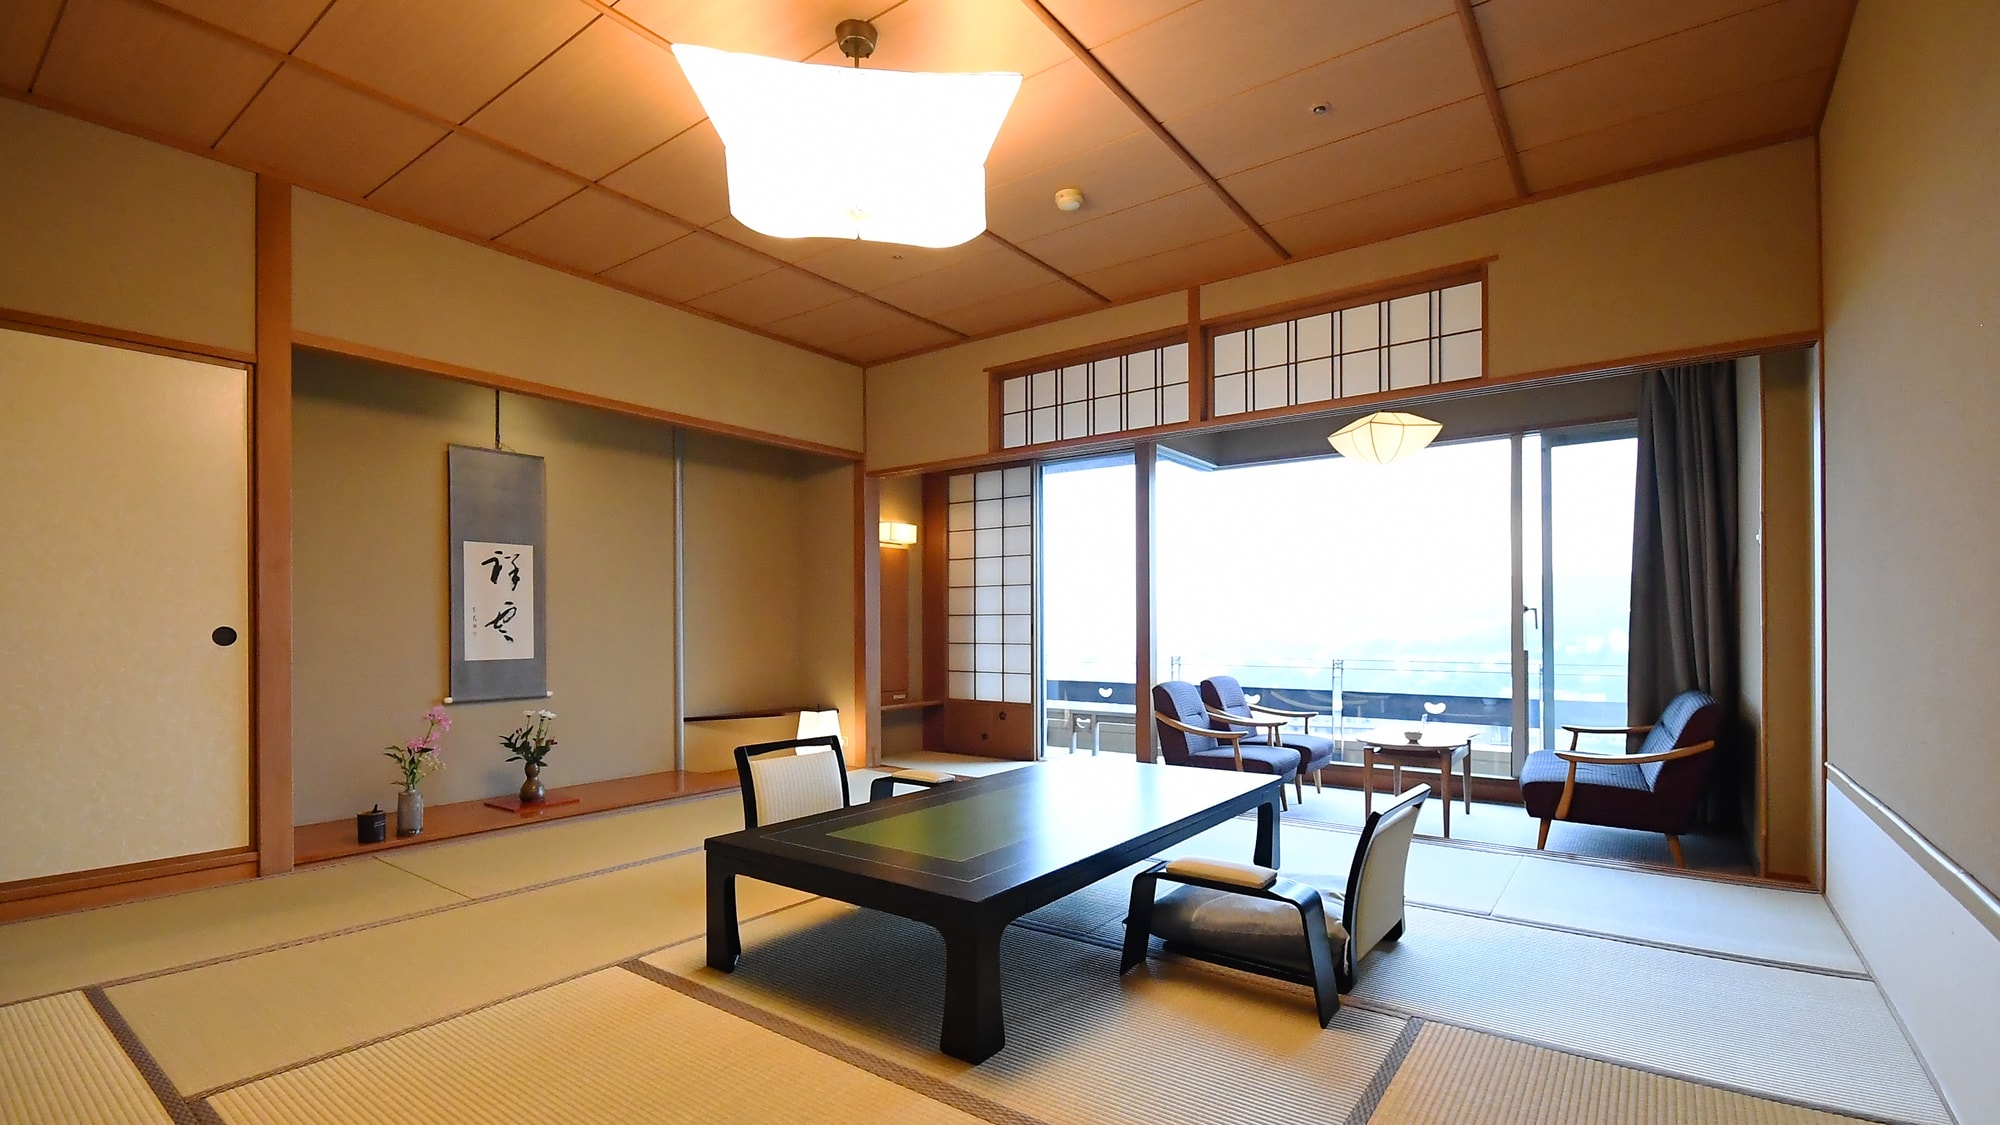 There are 42 guest rooms, mainly Japanese-style rooms with 12.5 tatami mats. We have 9 guest rooms with hot spring open-air baths.